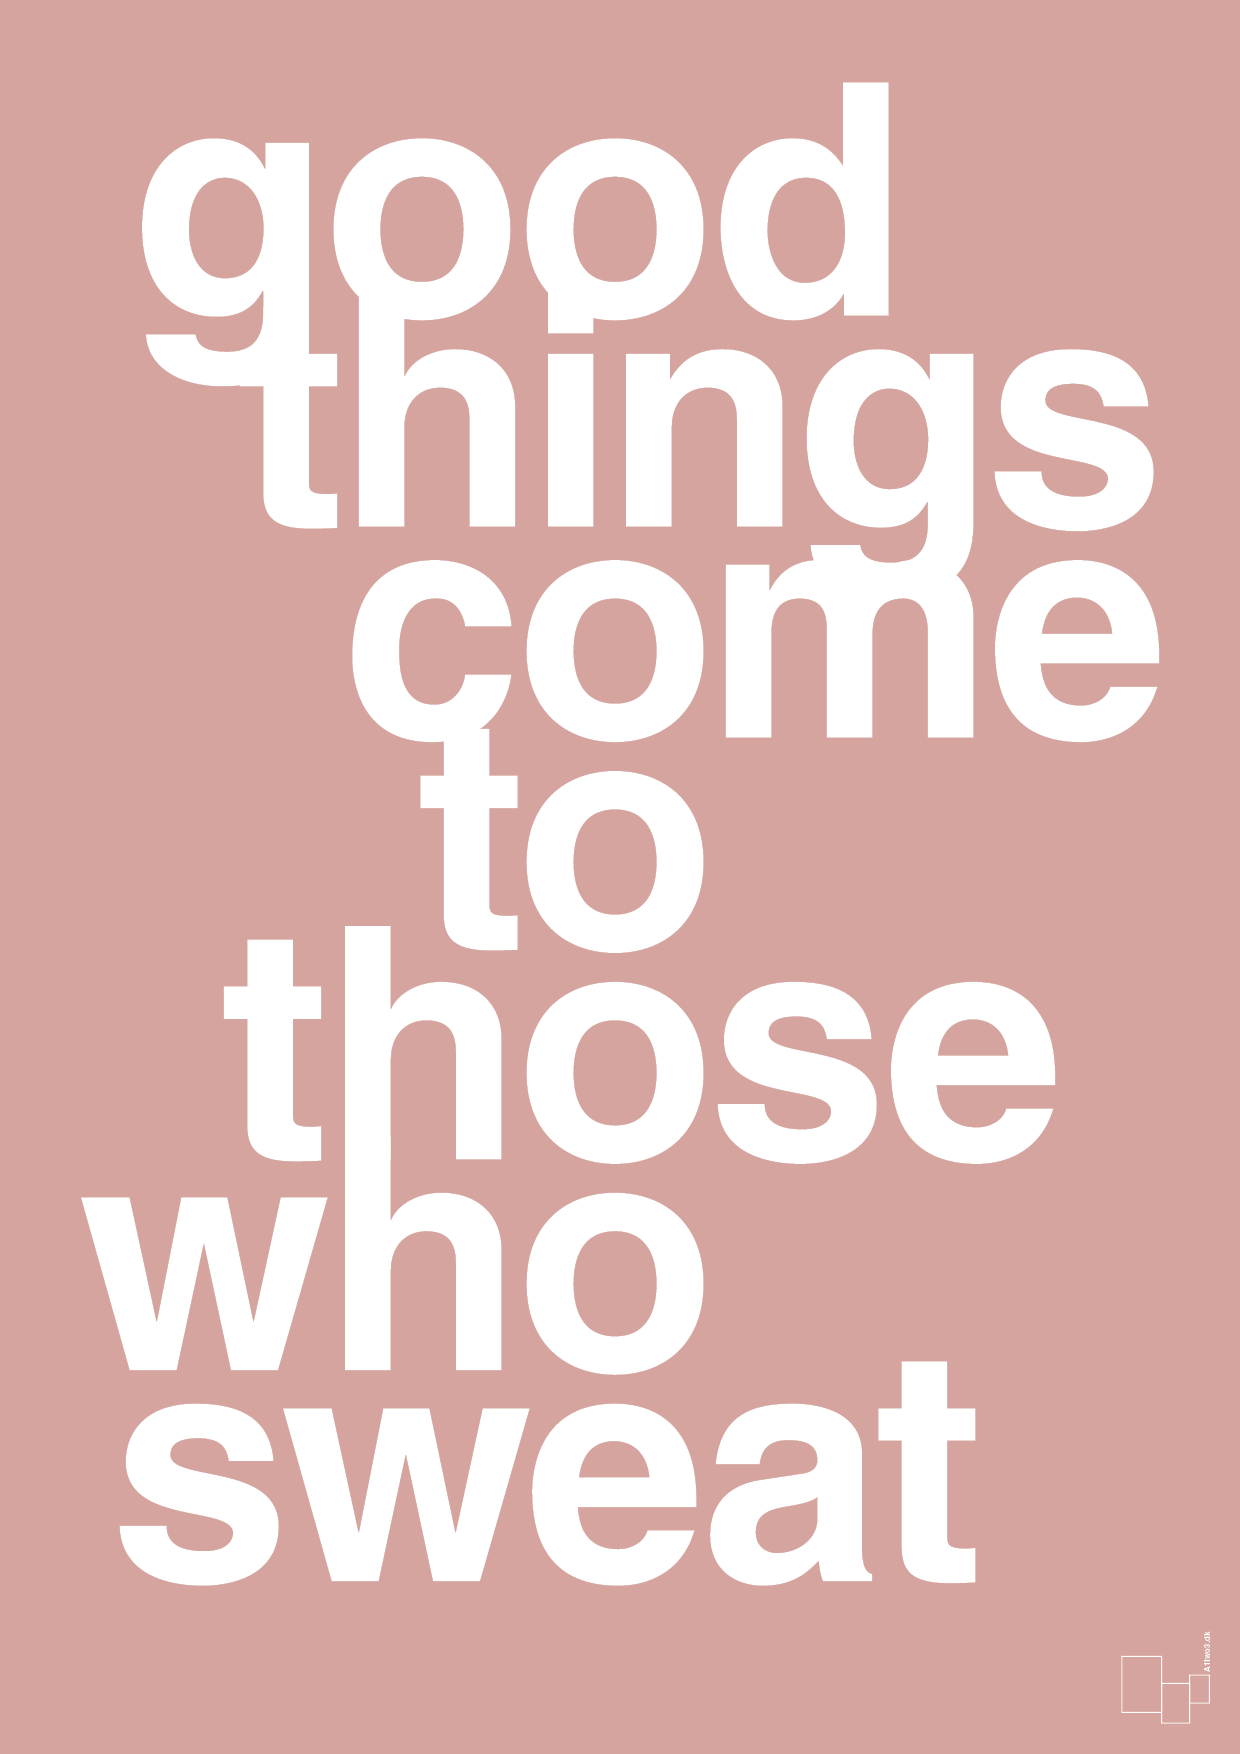 good things come to those who sweat - Plakat med Sport & Fritid i Bubble Shell